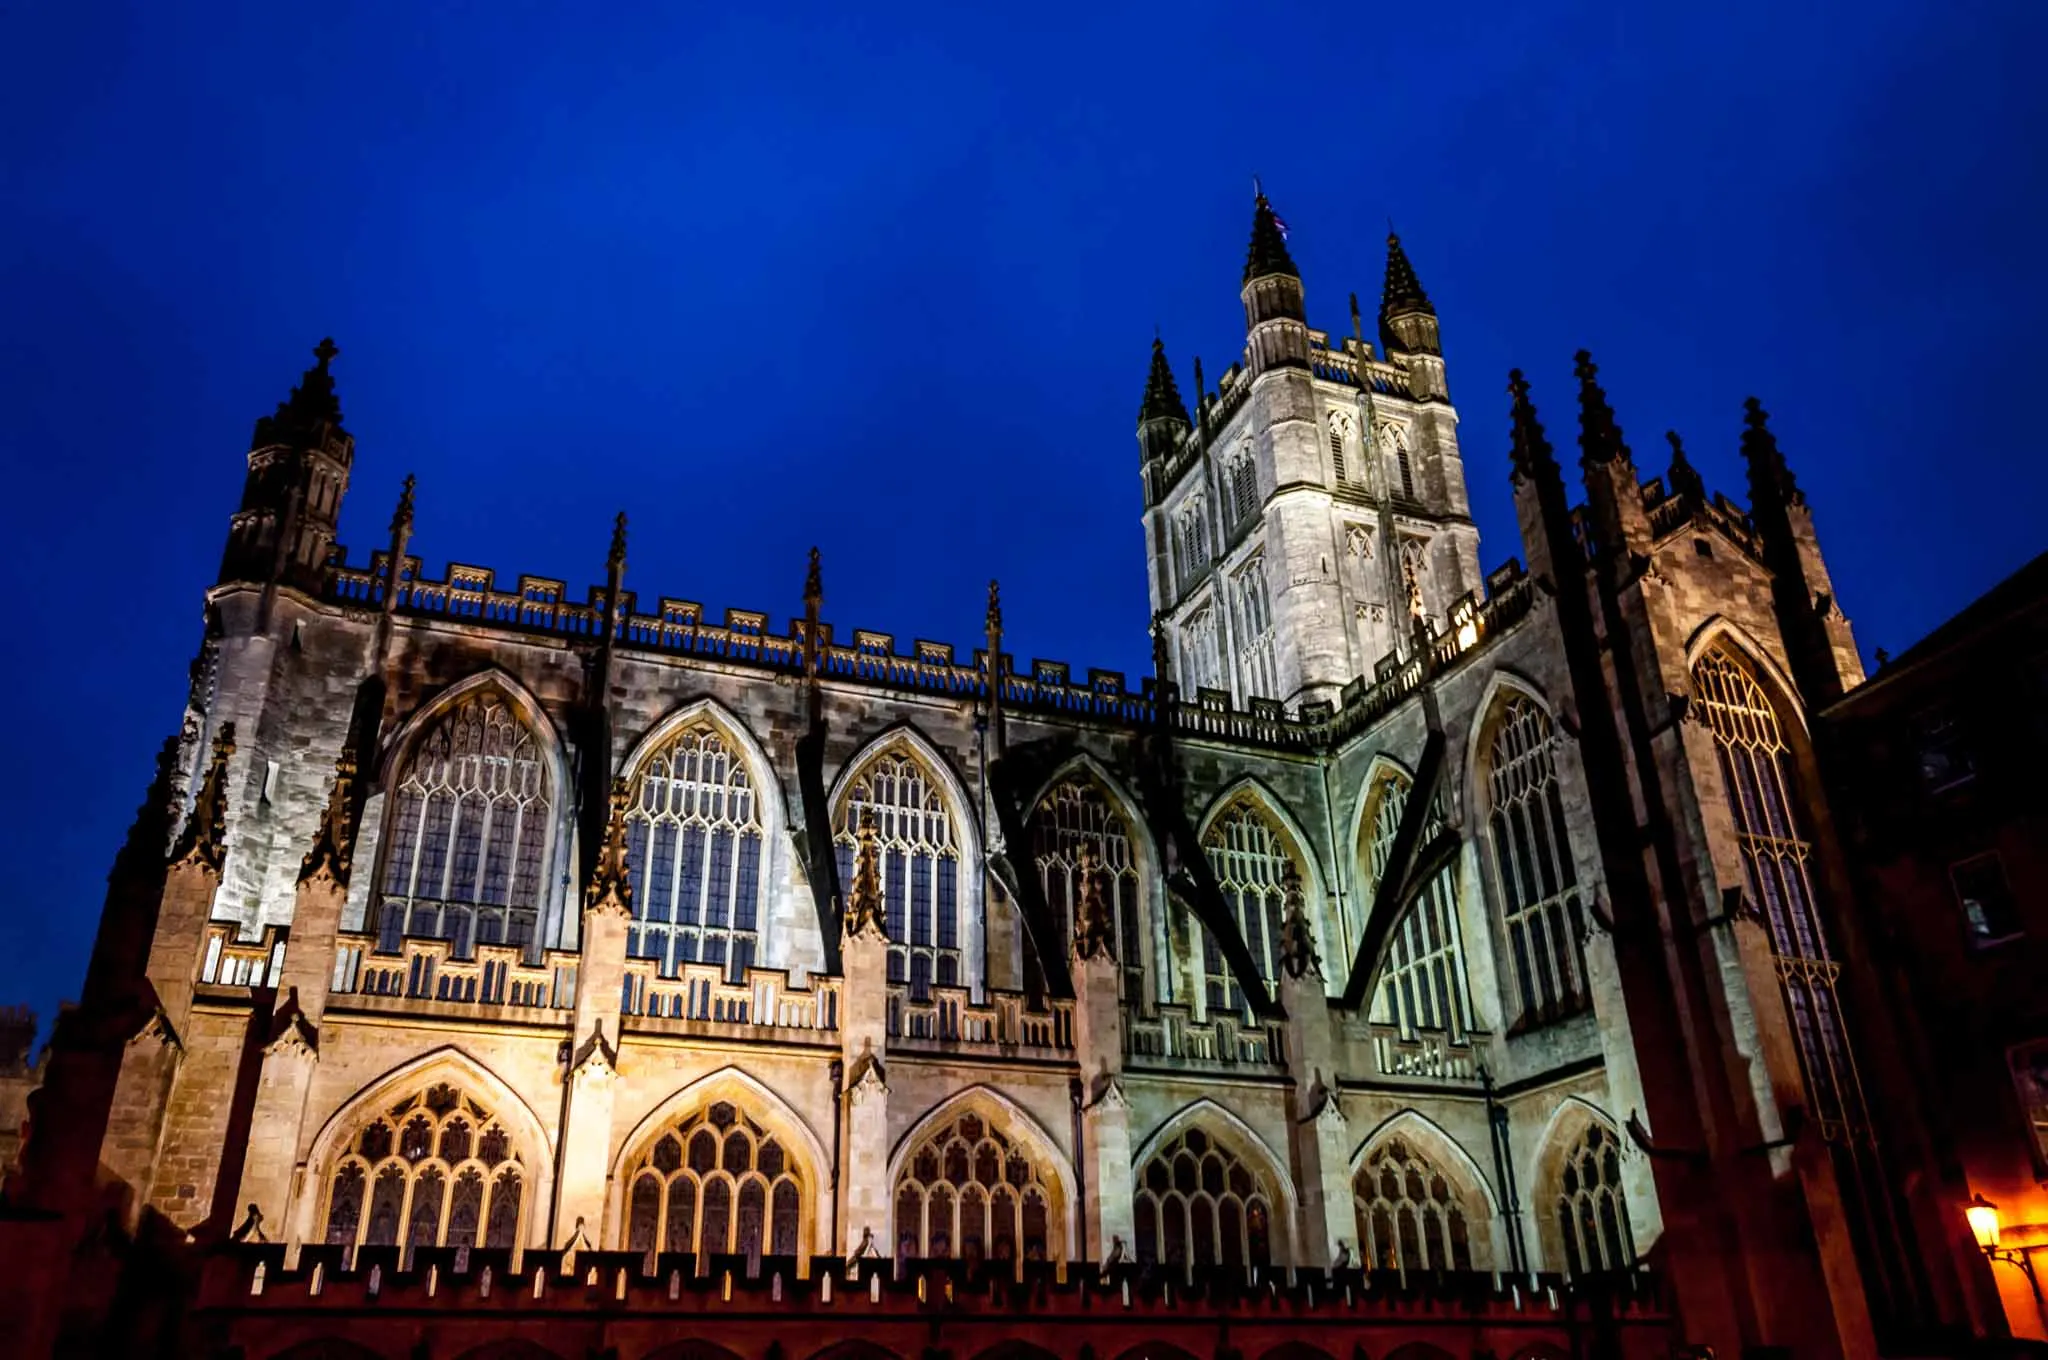 Gothic cathedral lit in colorful lights at night, the Bath Abbey.